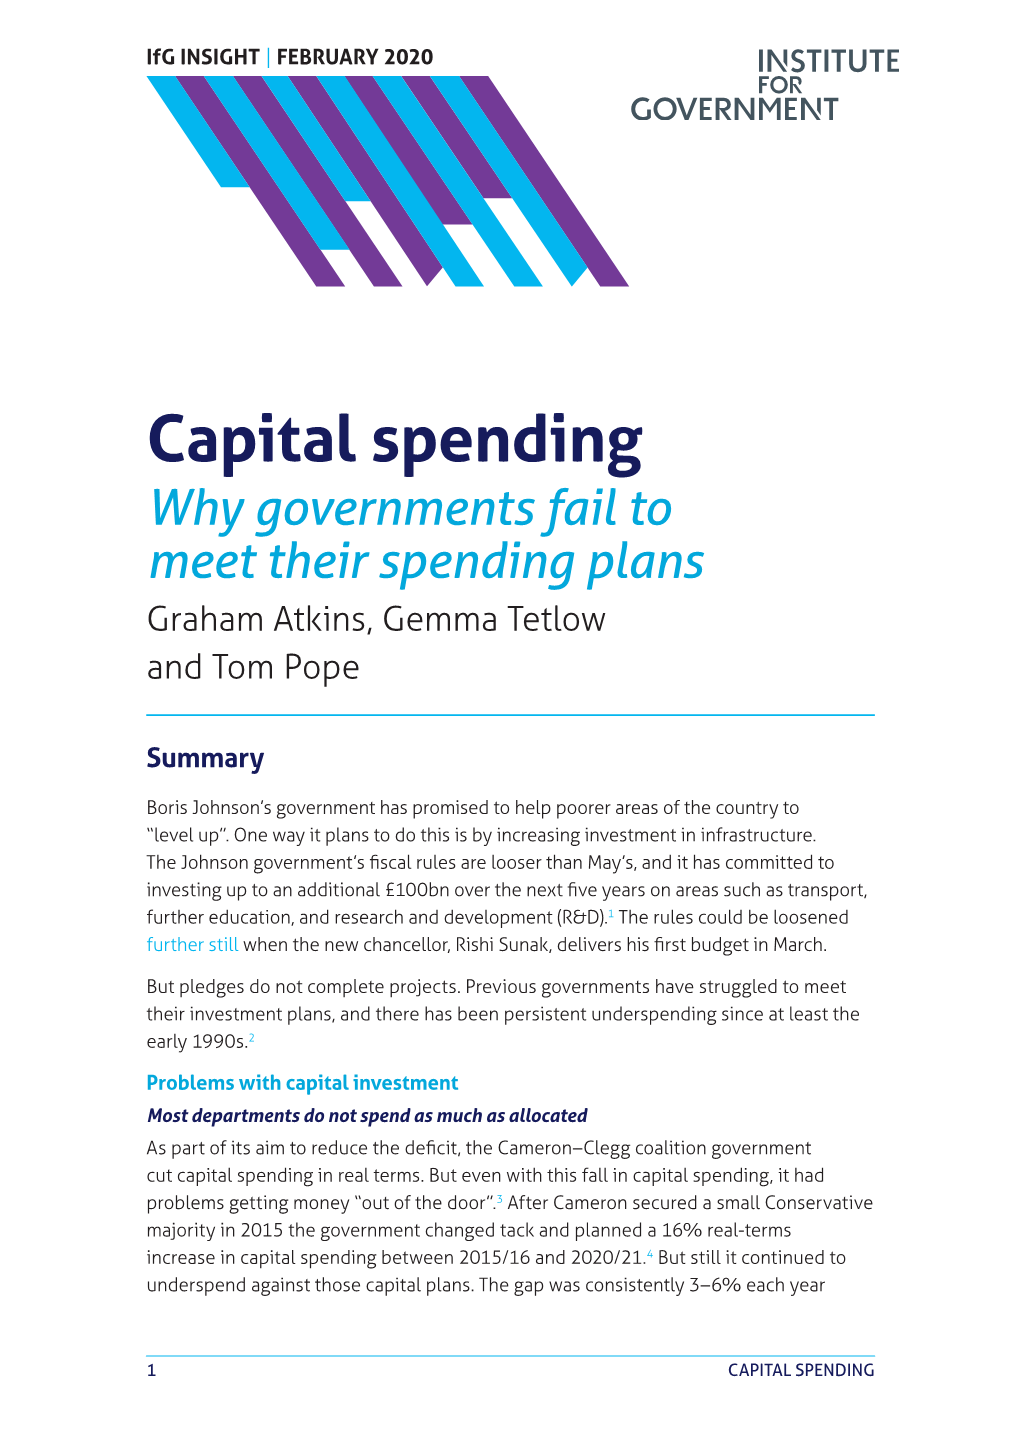 Capital Spending Why Governments Fail to Meet Their Spending Plans Graham Atkins, Gemma Tetlow and Tom Pope